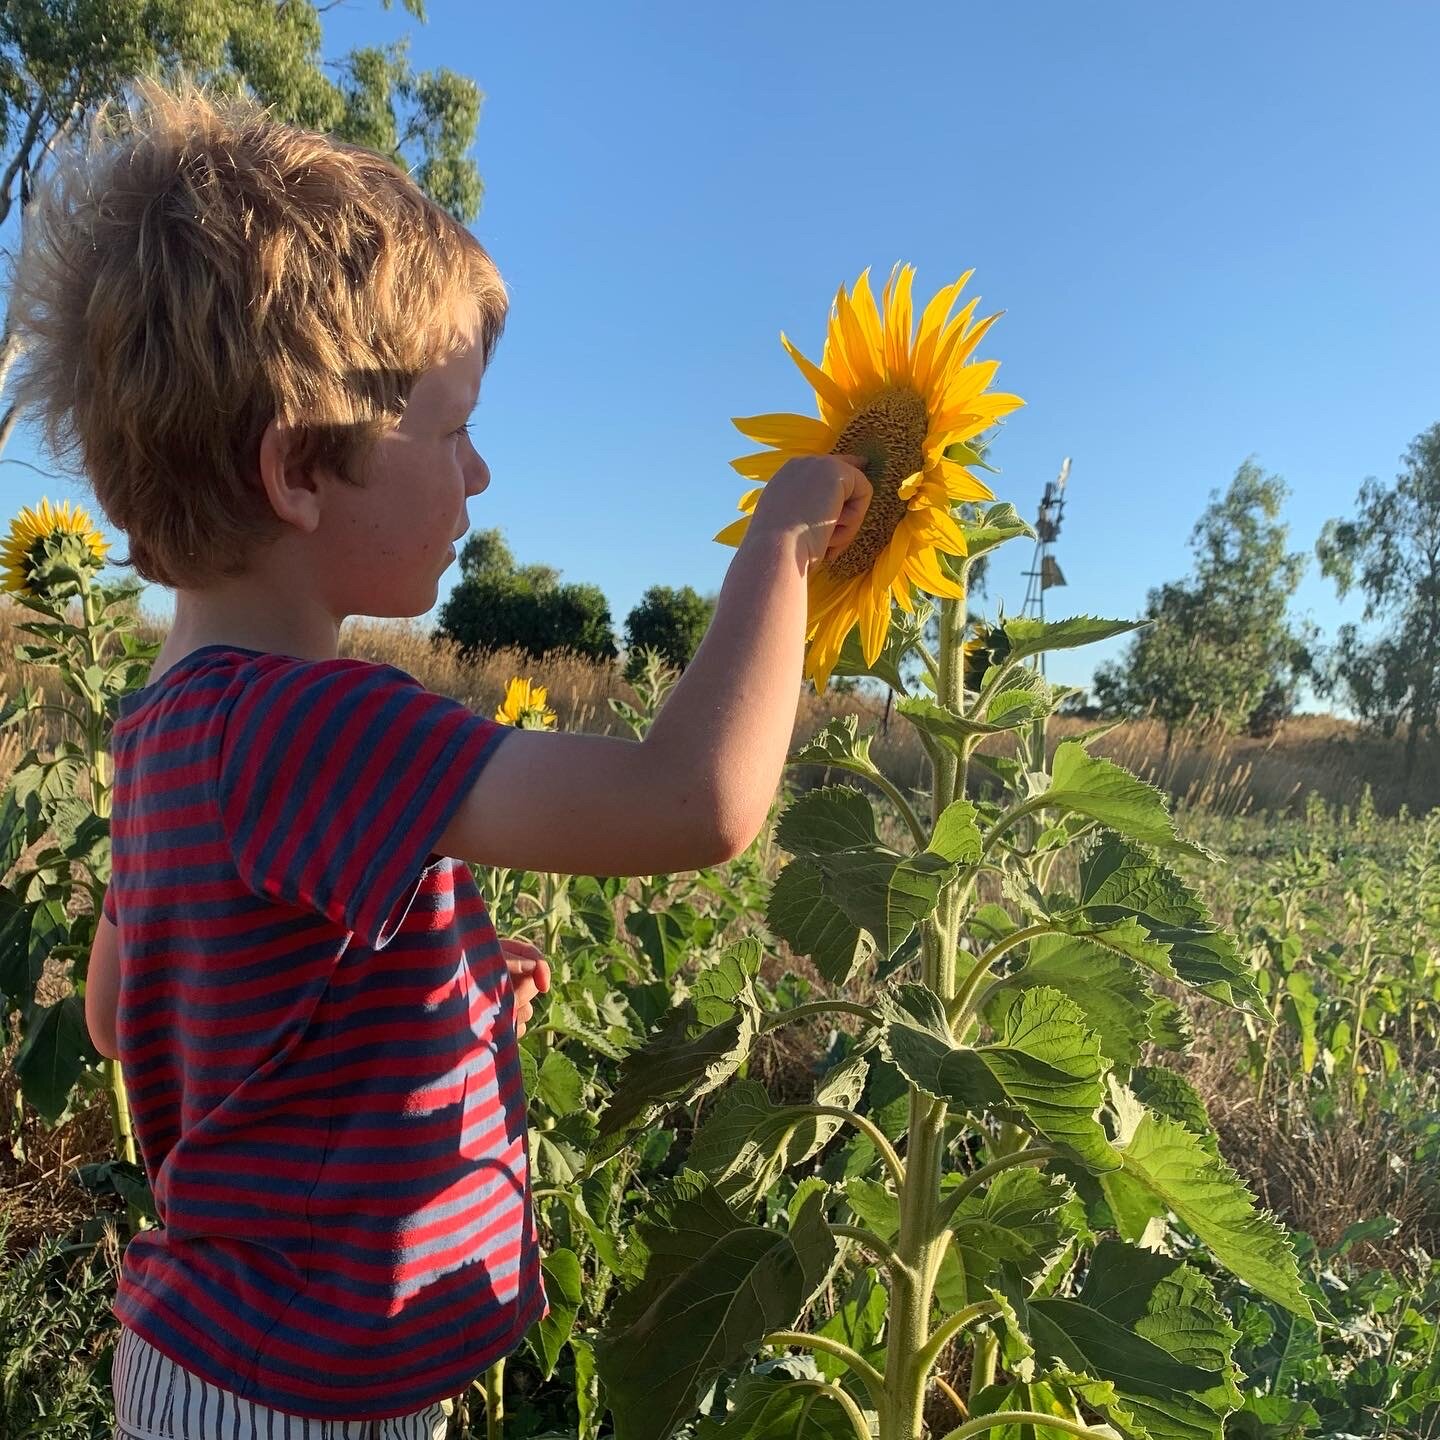 Admiring the sunflowers before the sheep enjoy them.